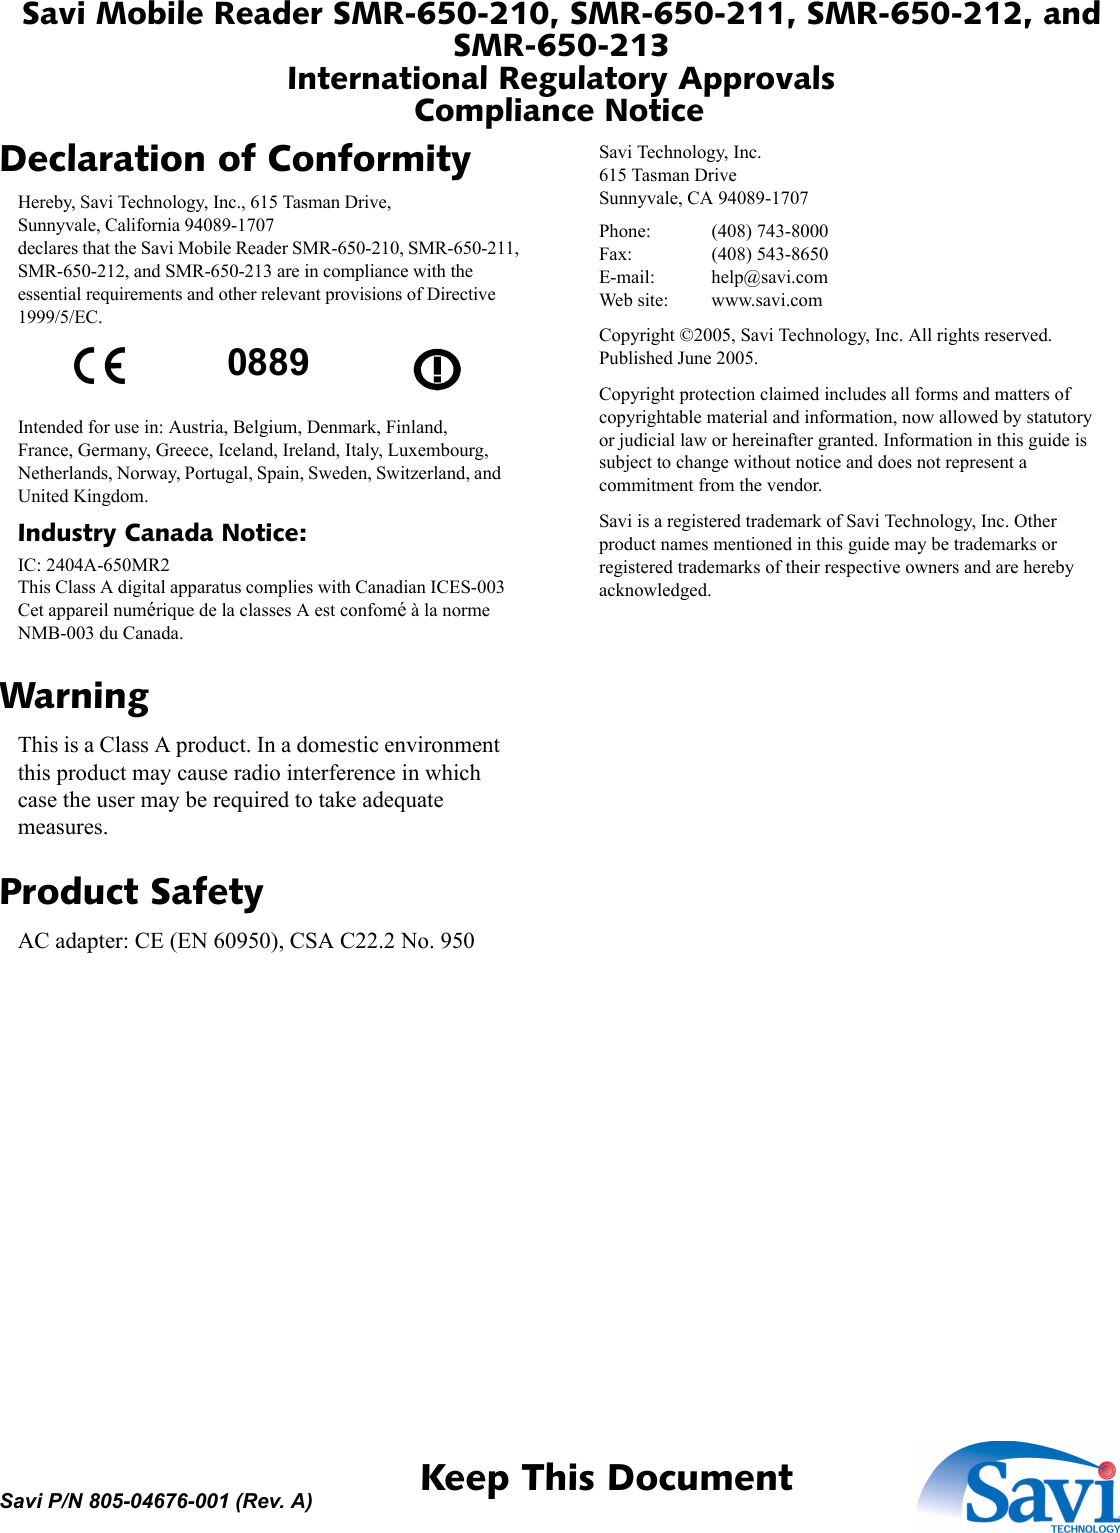 Savi Mobile Reader SMR-650-210, SMR-650-211, SMR-650-212, and SMR-650-213International Regulatory ApprovalsCompliance Notice 1  Keep This DocumentSavi P/N 805-04676-001 (Rev. A)Declaration of ConformityHereby, Savi Technology, Inc., 615 Tasman Drive,Sunnyvale, California 94089-1707declares that the Savi Mobile Reader SMR-650-210, SMR-650-211, SMR-650-212, and SMR-650-213 are in compliance with the essential requirements and other relevant provisions of Directive 1999/5/EC.Intended for use in: Austria, Belgium, Denmark, Finland, France, Germany, Greece, Iceland, Ireland, Italy, Luxembourg, Netherlands, Norway, Portugal, Spain, Sweden, Switzerland, and United Kingdom.Industry Canada Notice:IC: 2404A-650MR2This Class A digital apparatus complies with Canadian ICES-003Cet appareil numérique de la classes A est confomé à la norme NMB-003 du Canada.WarningThis is a Class A product. In a domestic environment this product may cause radio interference in which case the user may be required to take adequate measures.Product SafetyAC adapter: CE (EN 60950), CSA C22.2 No. 950Savi Technology, Inc.615 Tasman DriveSunnyvale, CA 94089-1707Phone: (408) 743-8000Fax: (408) 543-8650E-mail: help@savi.comWeb site: www.savi.comCopyright ©2005, Savi Technology, Inc. All rights reserved. Published June 2005.Copyright protection claimed includes all forms and matters of copyrightable material and information, now allowed by statutory or judicial law or hereinafter granted. Information in this guide is subject to change without notice and does not represent a commitment from the vendor.Savi is a registered trademark of Savi Technology, Inc. Other product names mentioned in this guide may be trademarks or registered trademarks of their respective owners and are hereby acknowledged.0889